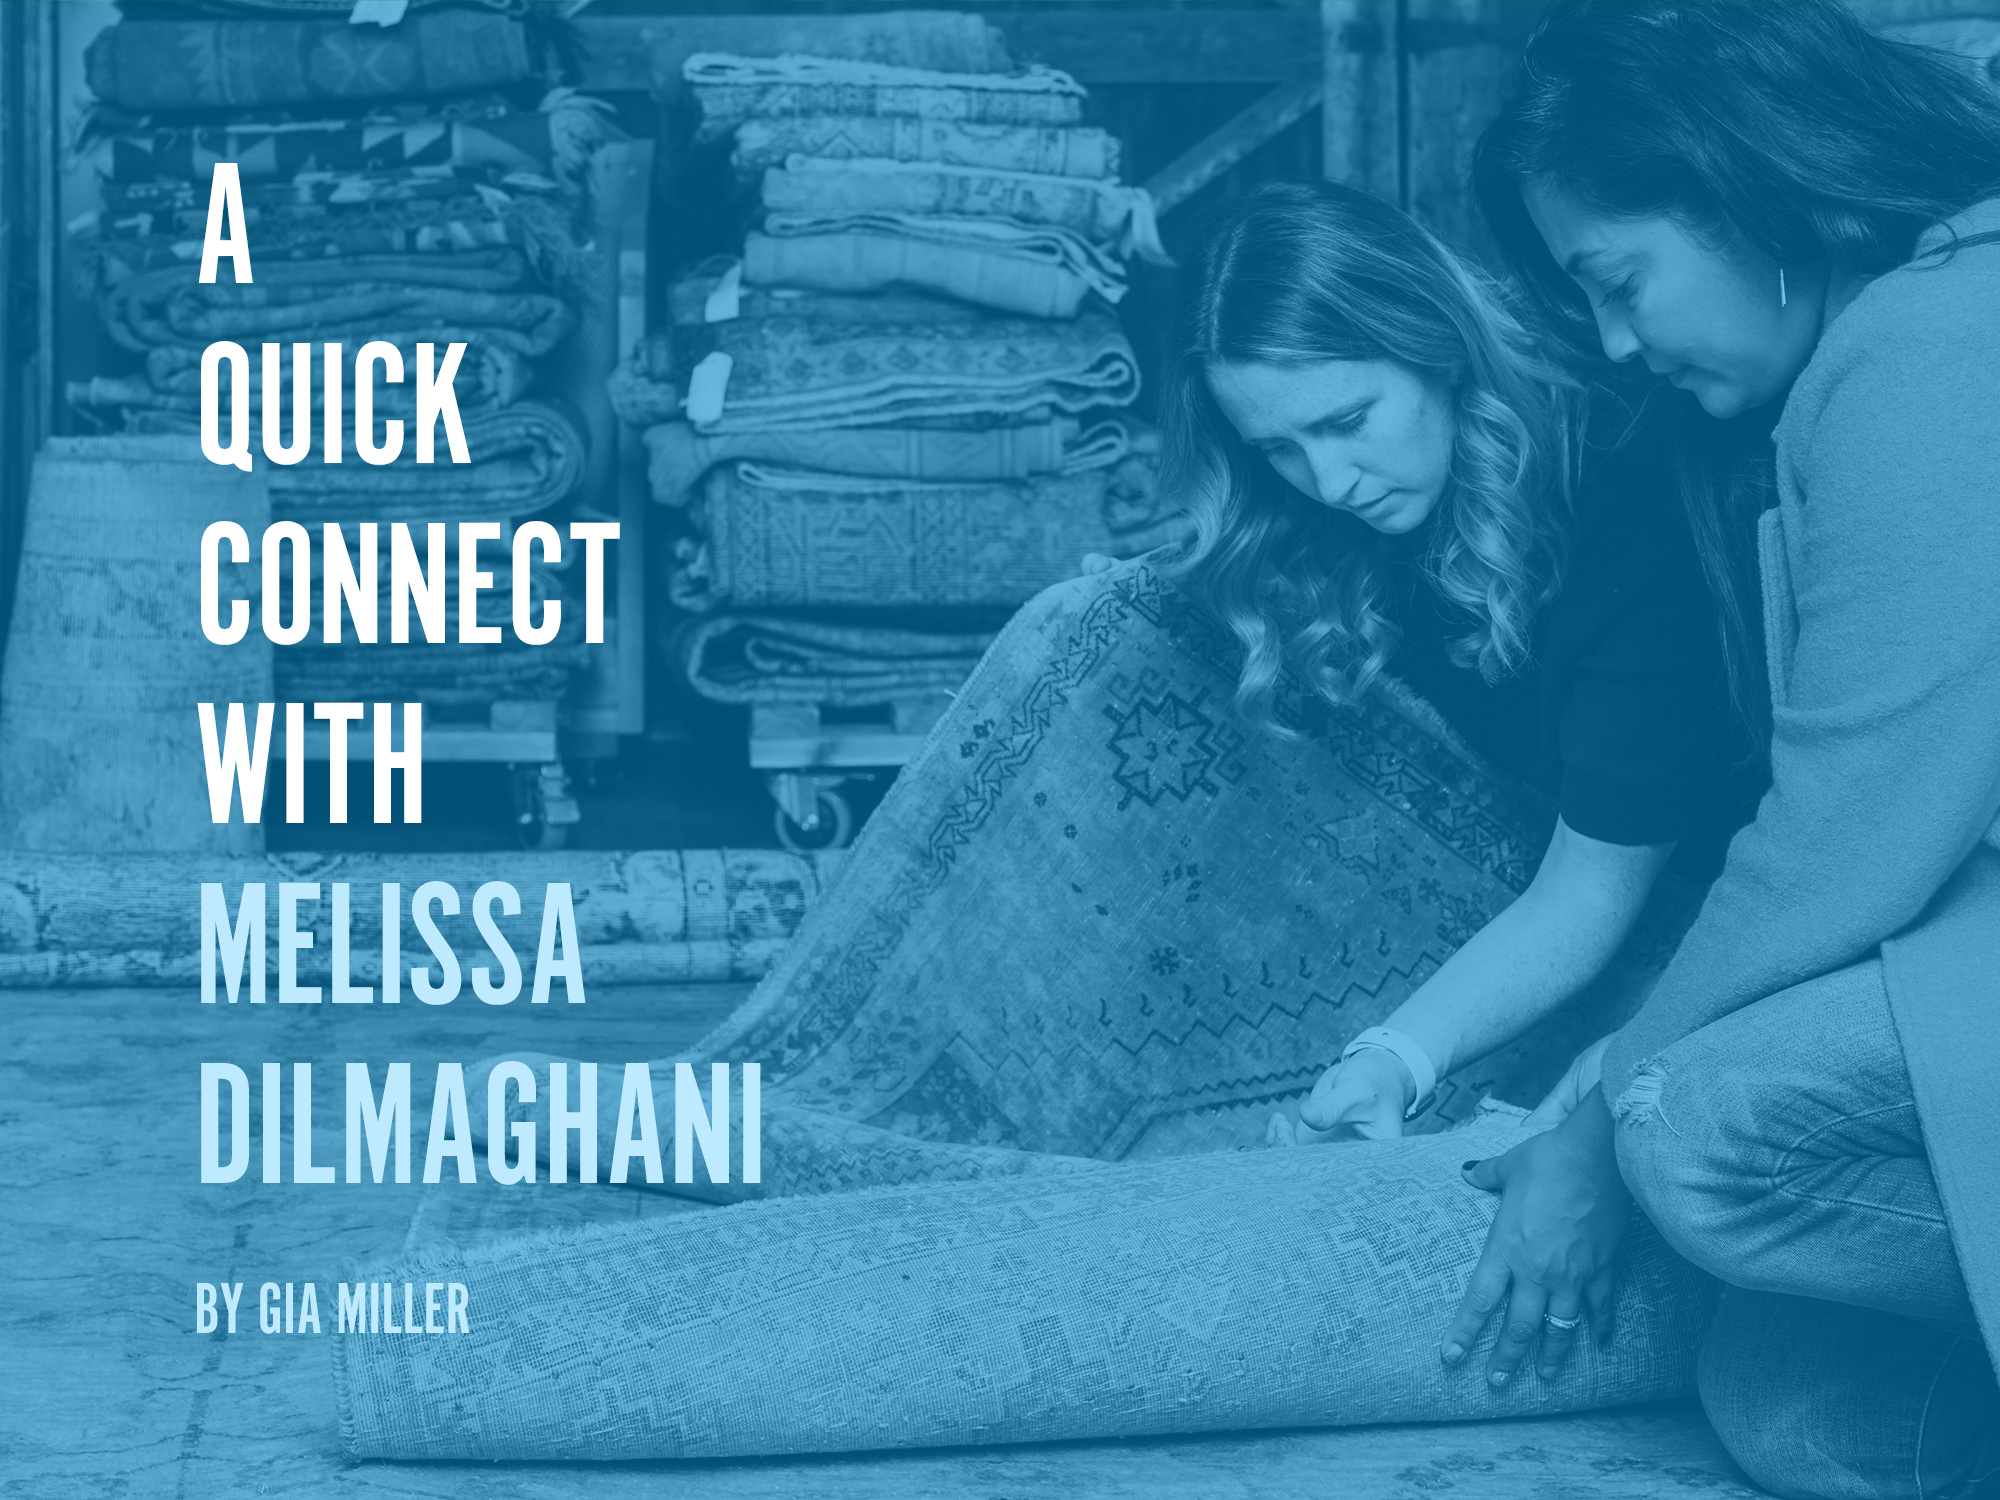 A Quick Connect with ... Melissa Dilmaghani